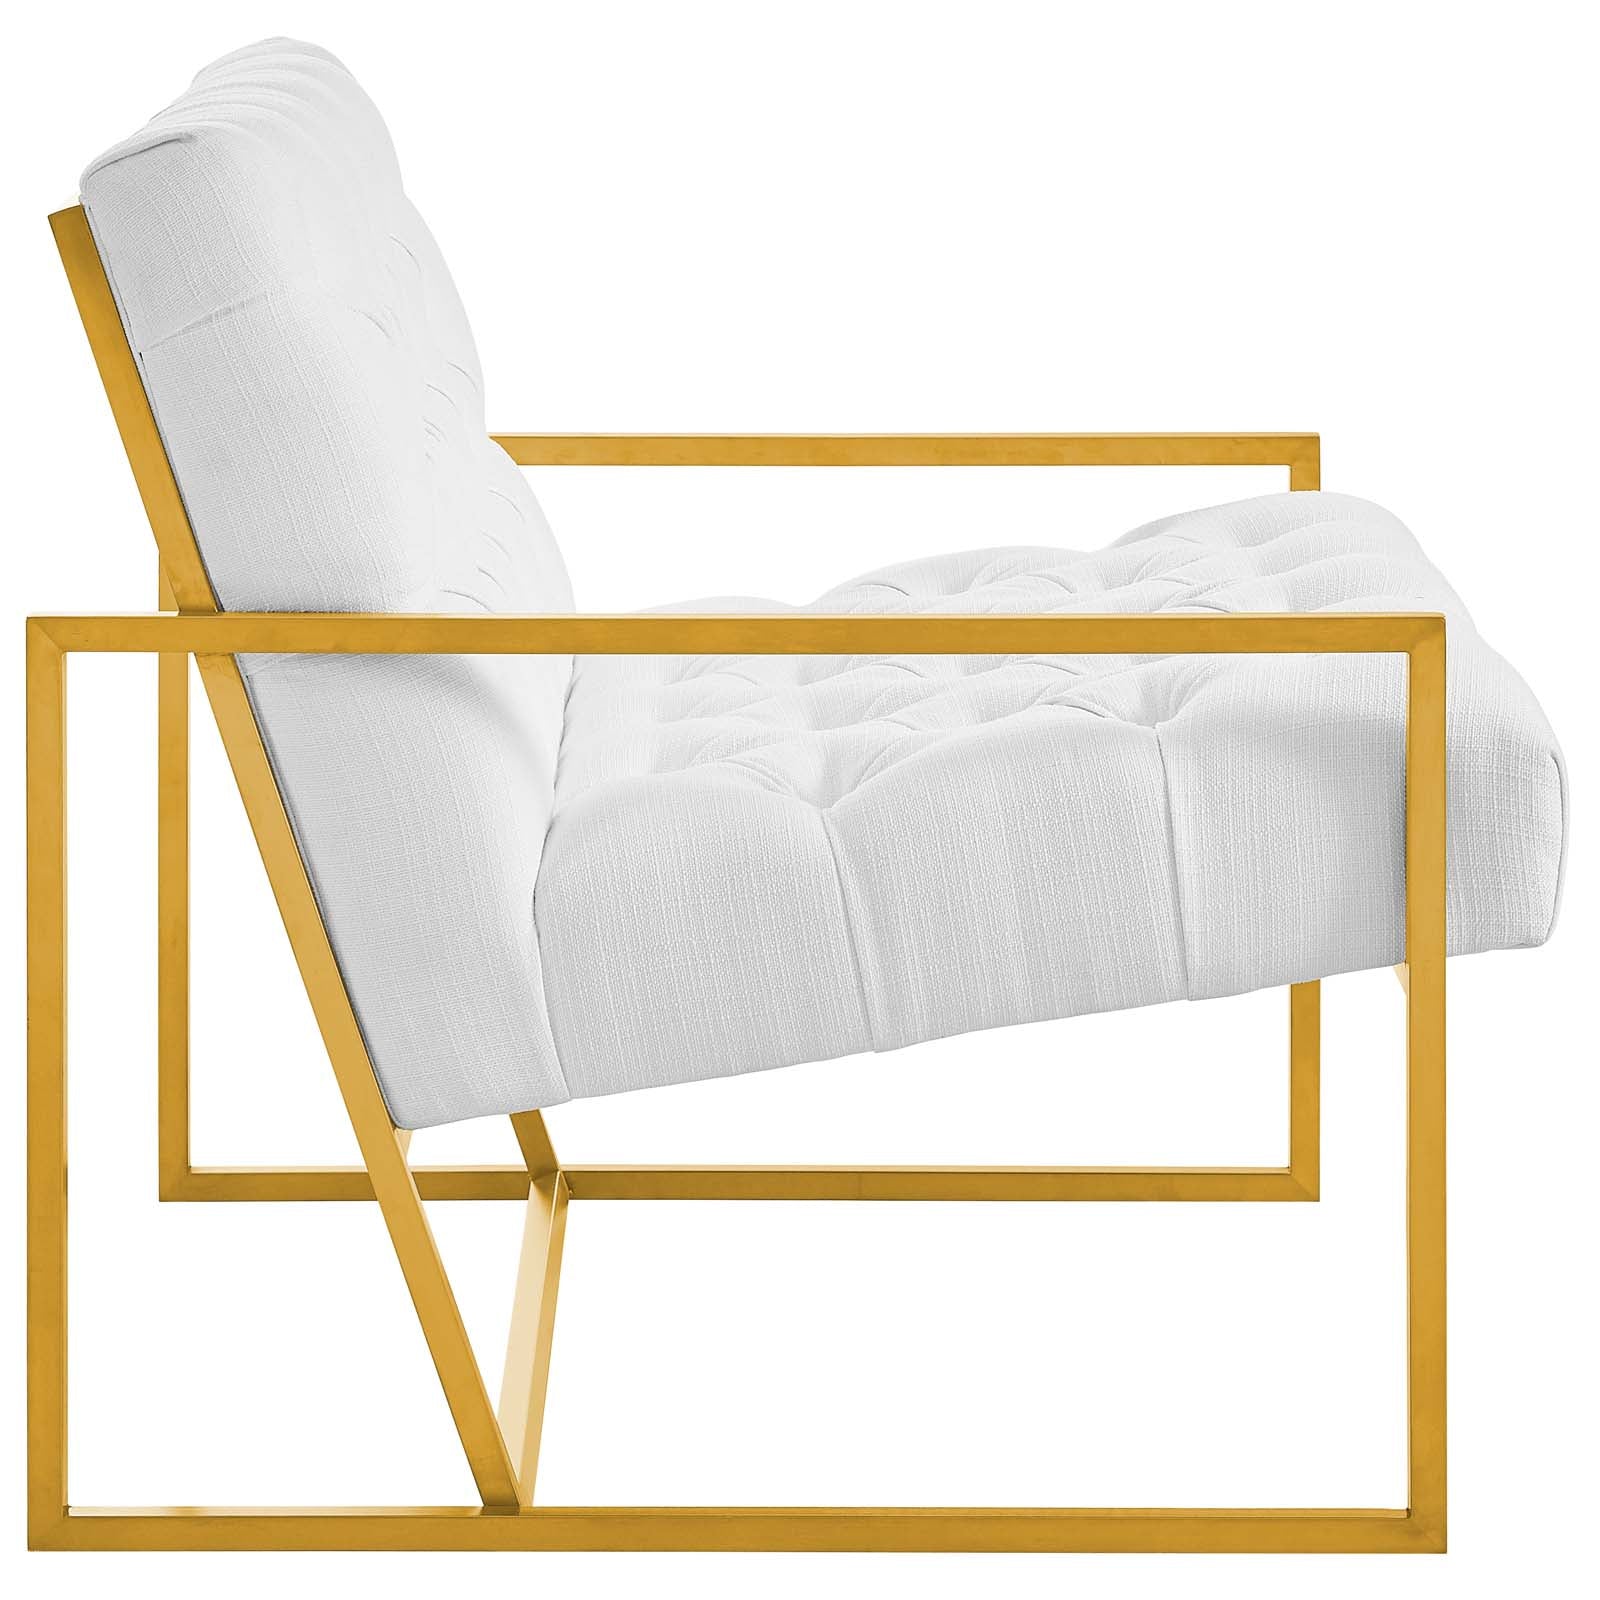 Bequest Gold Stainless Steel Upholstered Fabric Accent Chair - East Shore Modern Home Furnishings